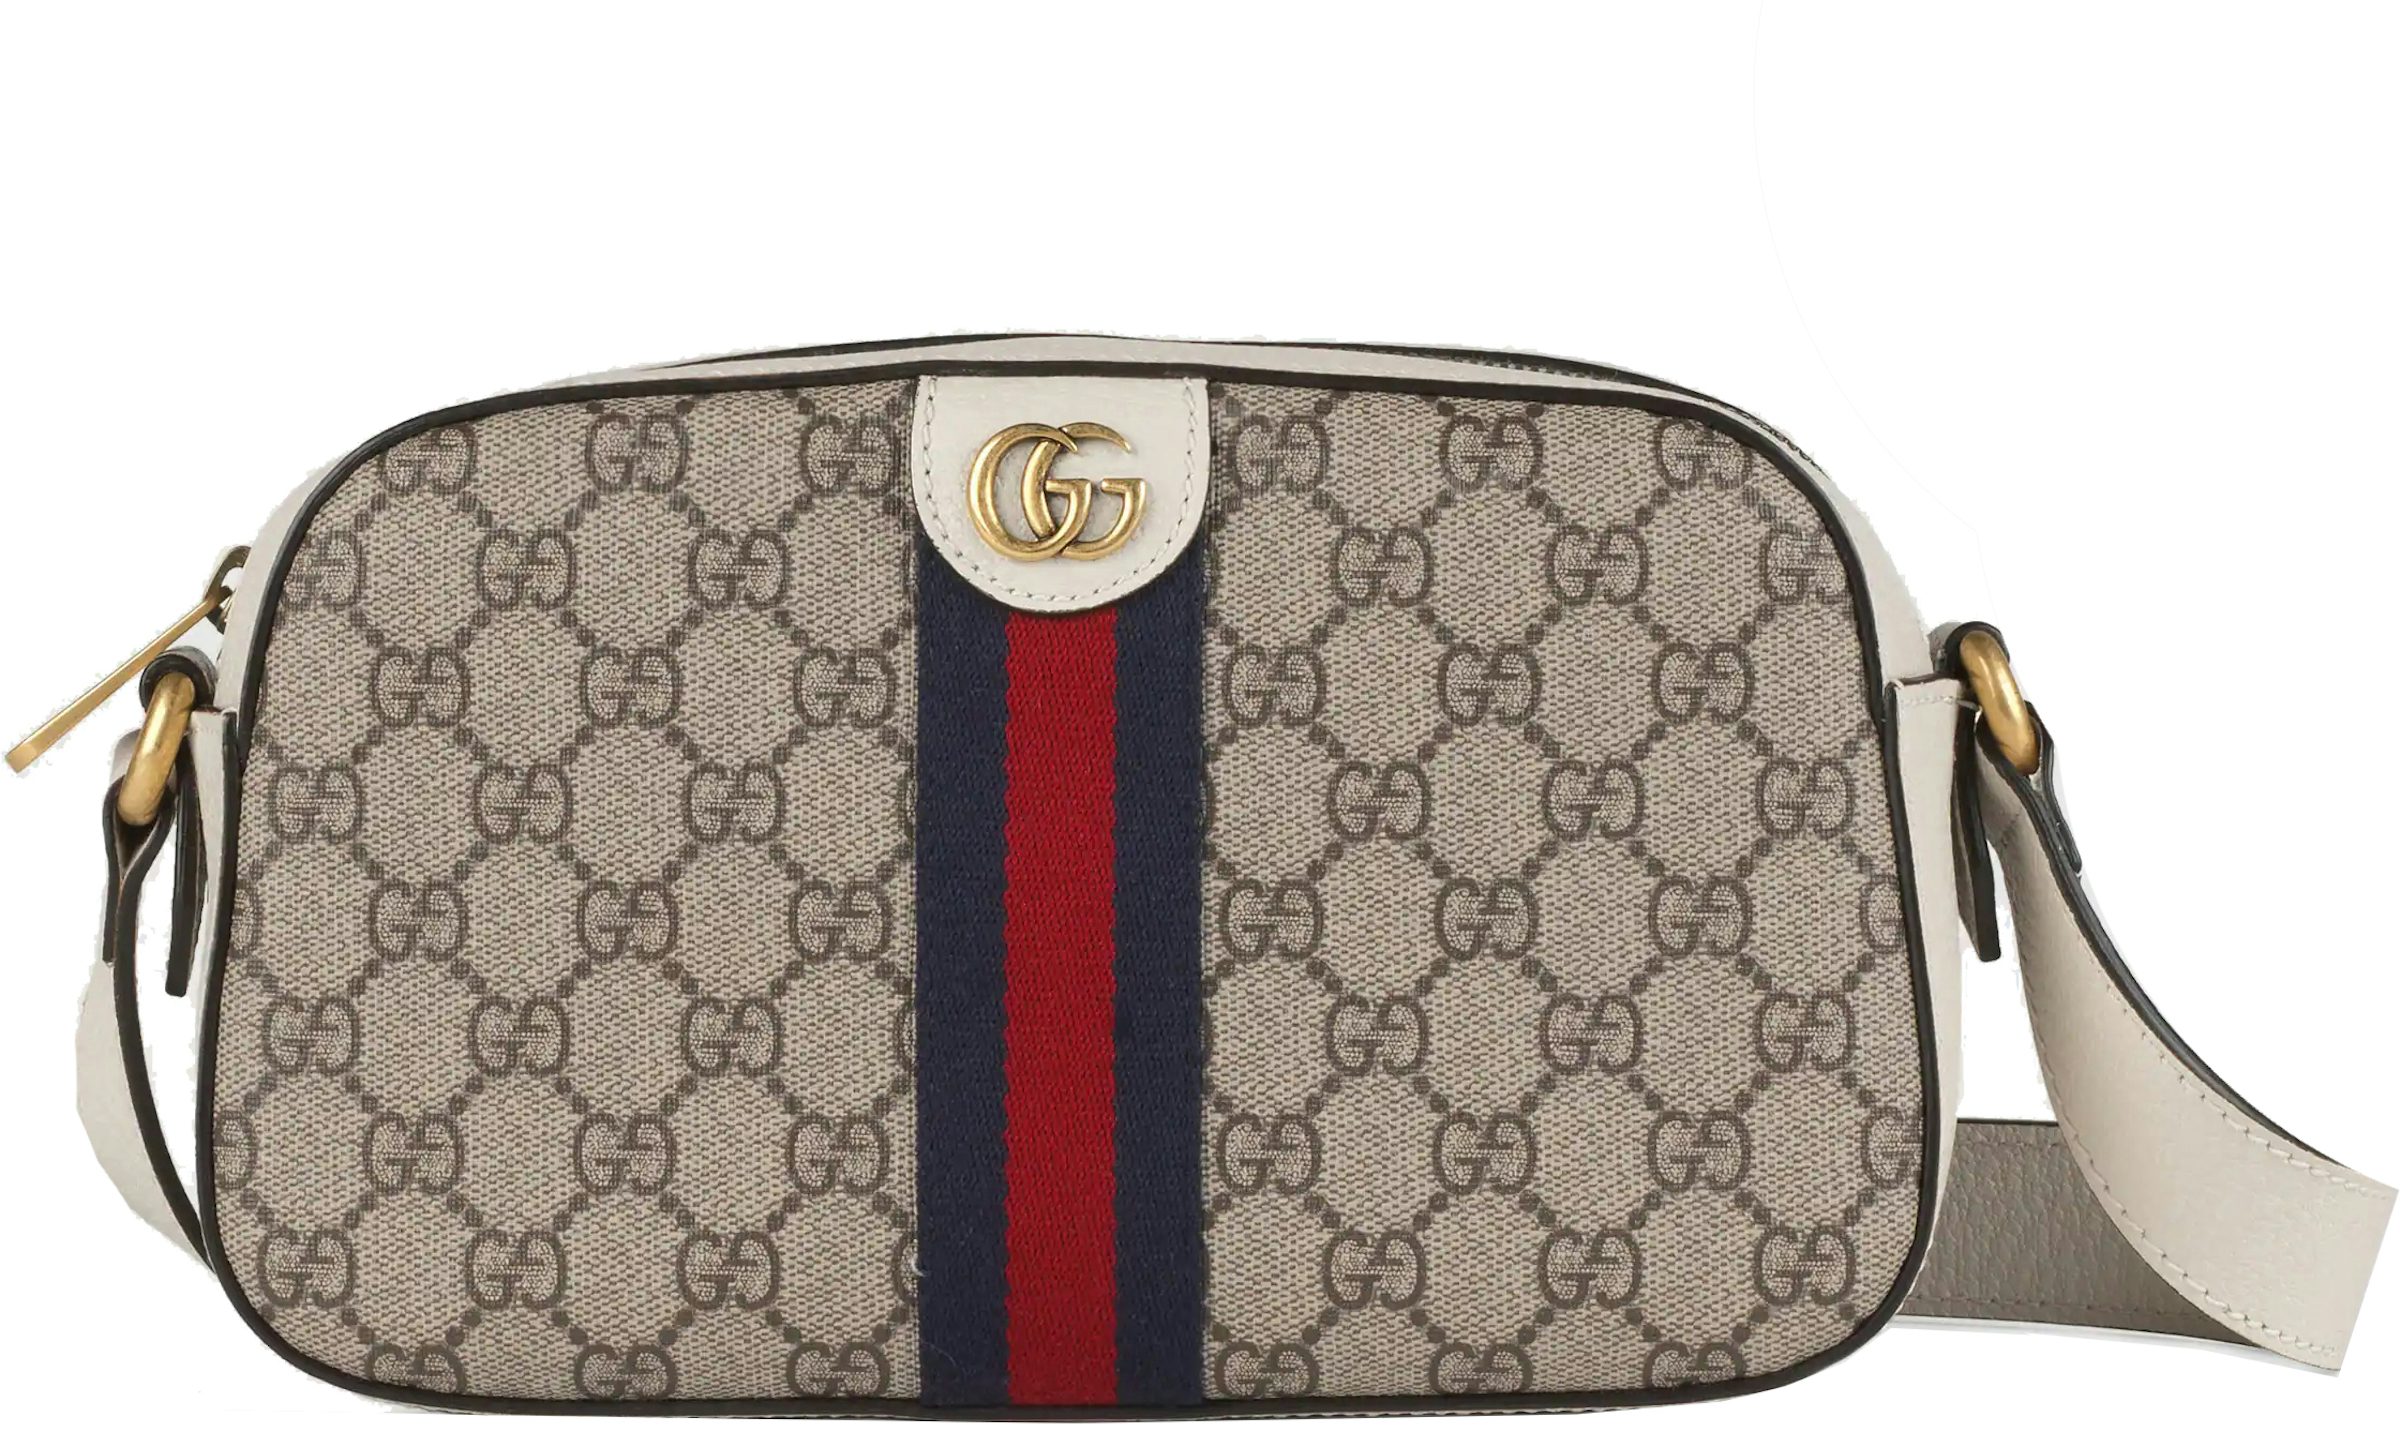 Gucci Ophidia Shoulder Bag Small GG Supreme Beige in Coated Canvas